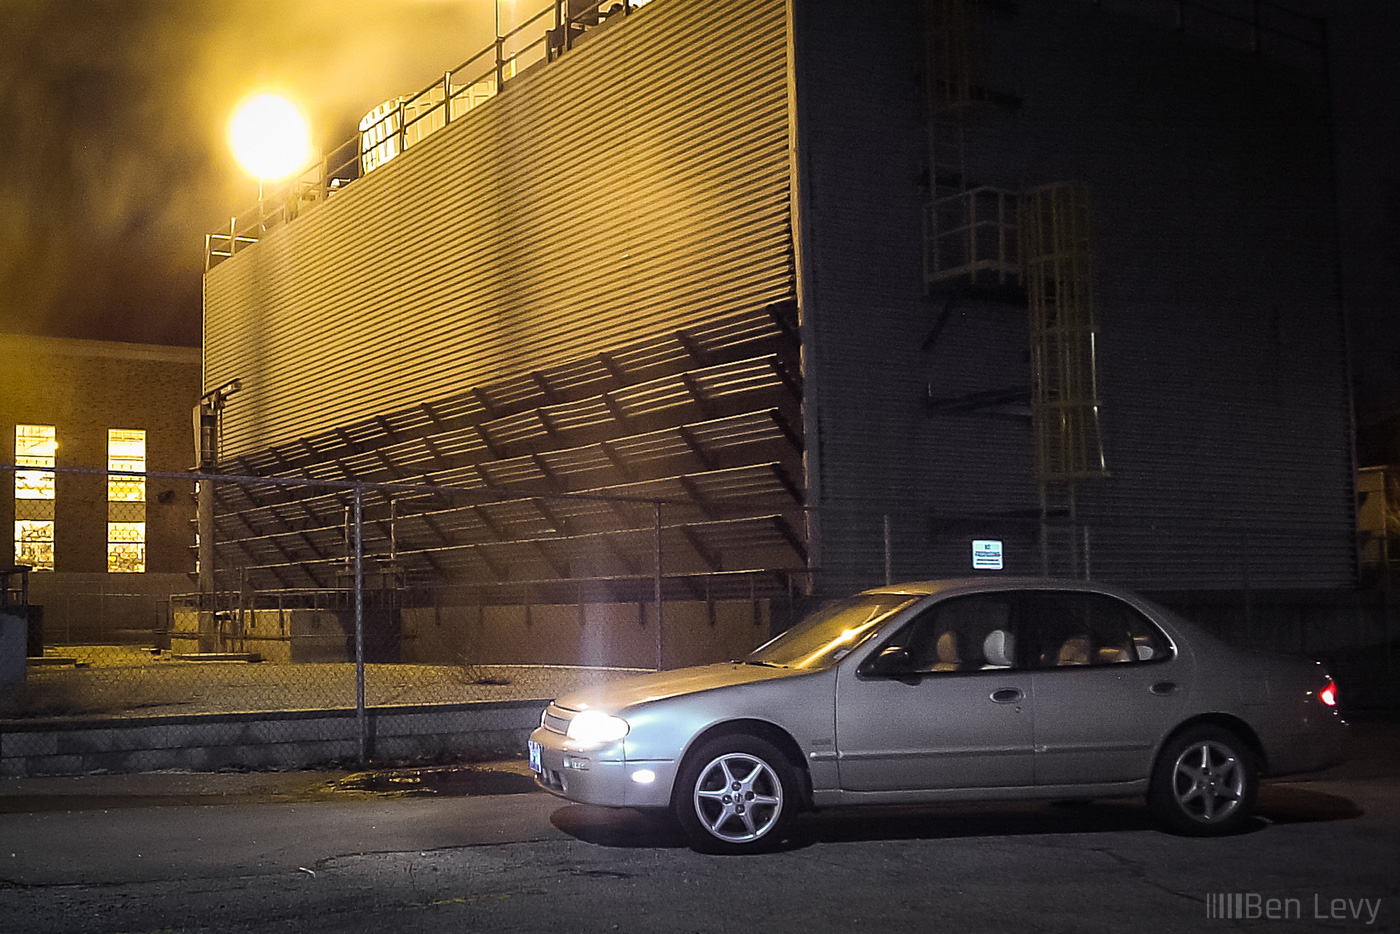 Altima Next to the Abott Power Plant in Champaign